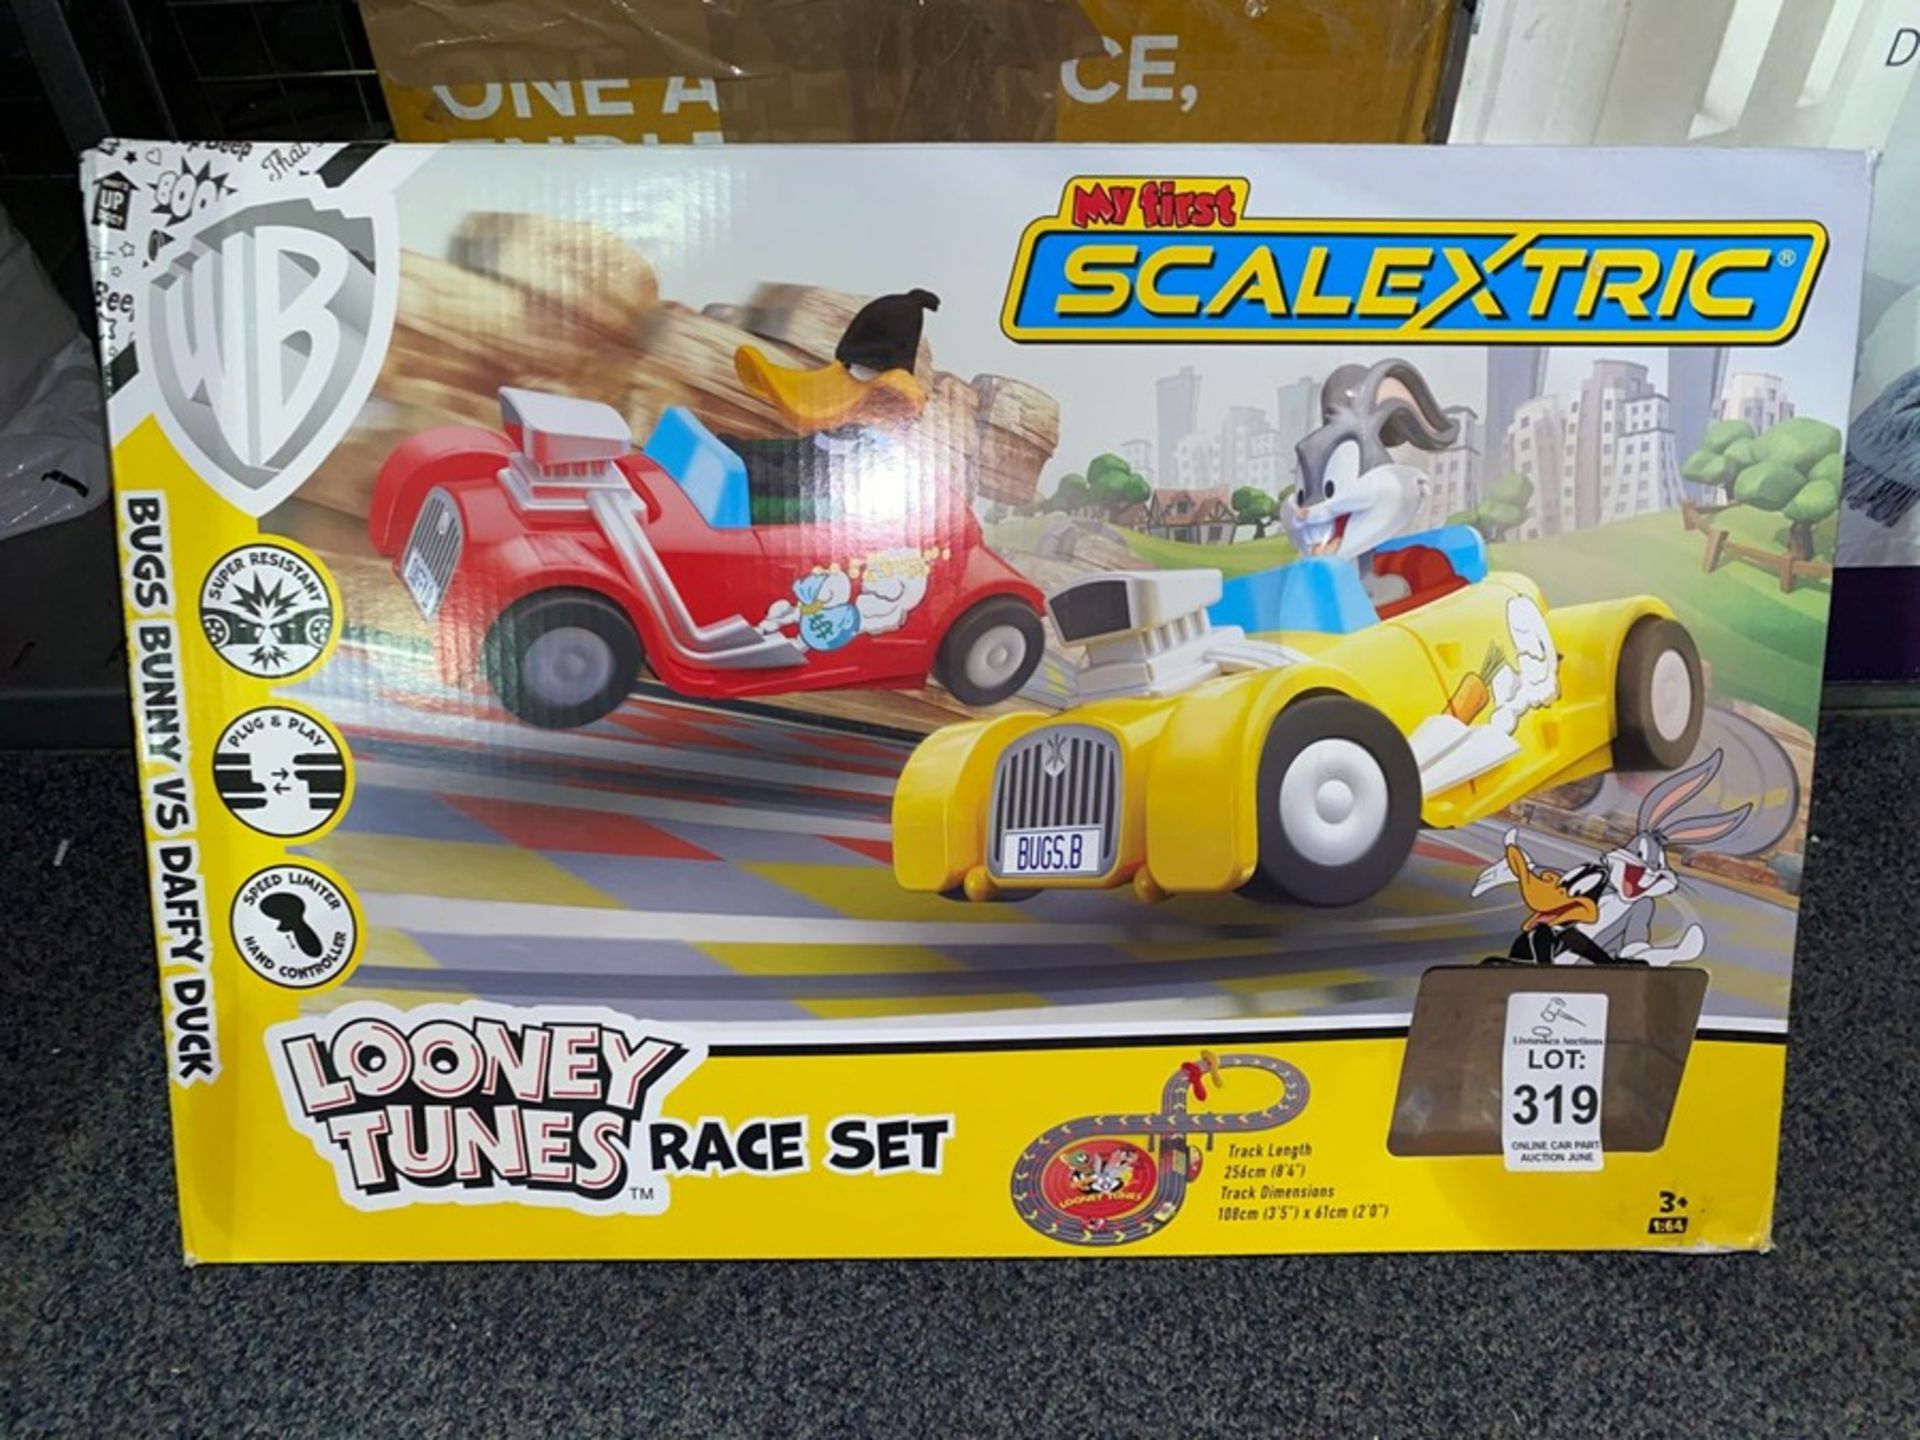 MY FIRST SCALEXTRIC LOONEY TUNES RACE SET